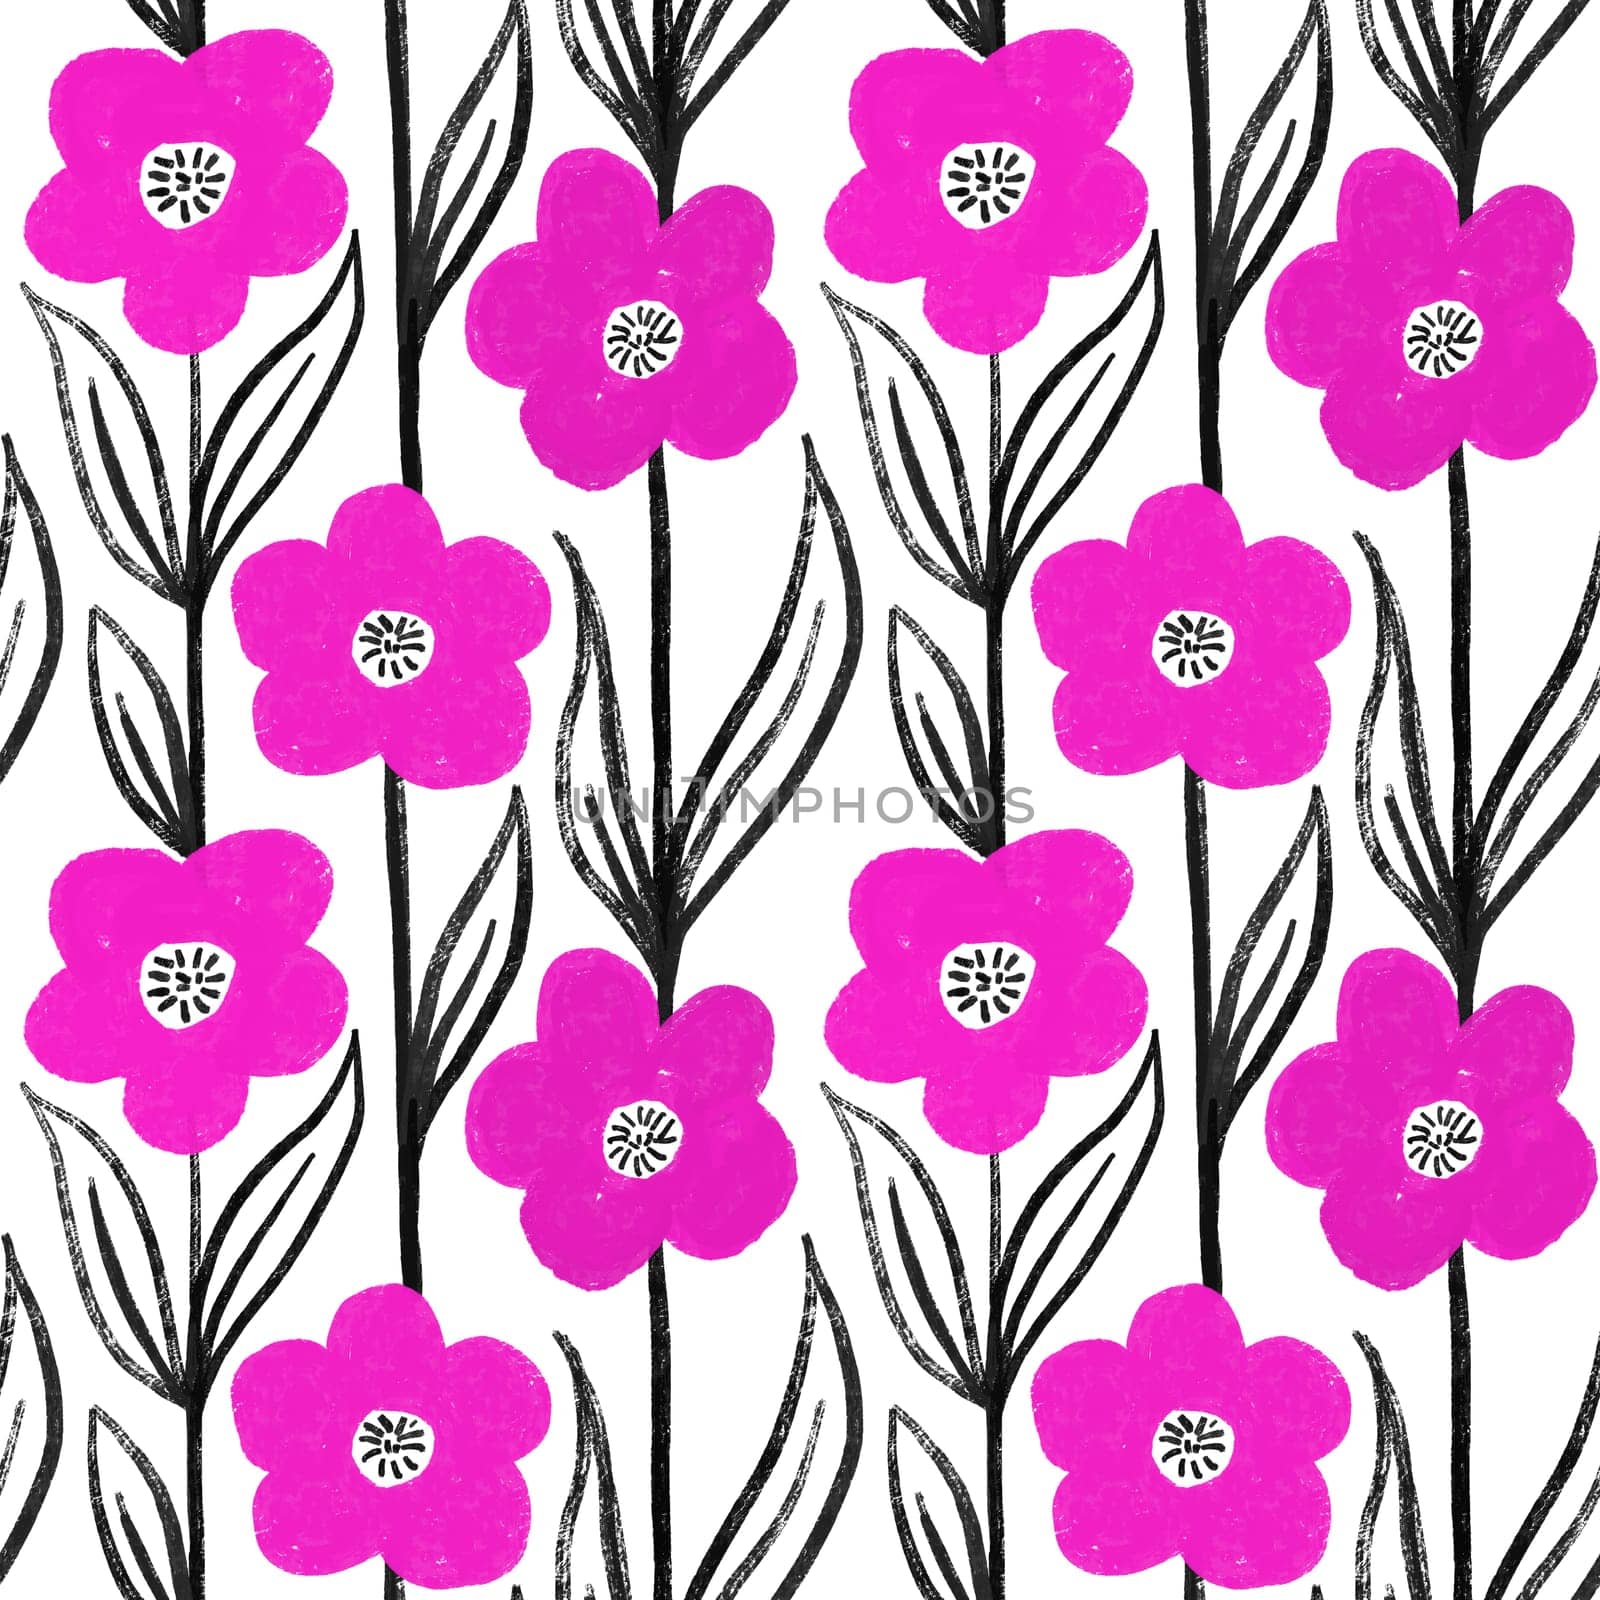 Hand drawn seamless pattern with hot pink fuchsia flowers with black leaves on white background. Floral daisy in vertical lines in mid century modern style, botanical decoration design for wallpaper textile blossom bloom print. by Lagmar